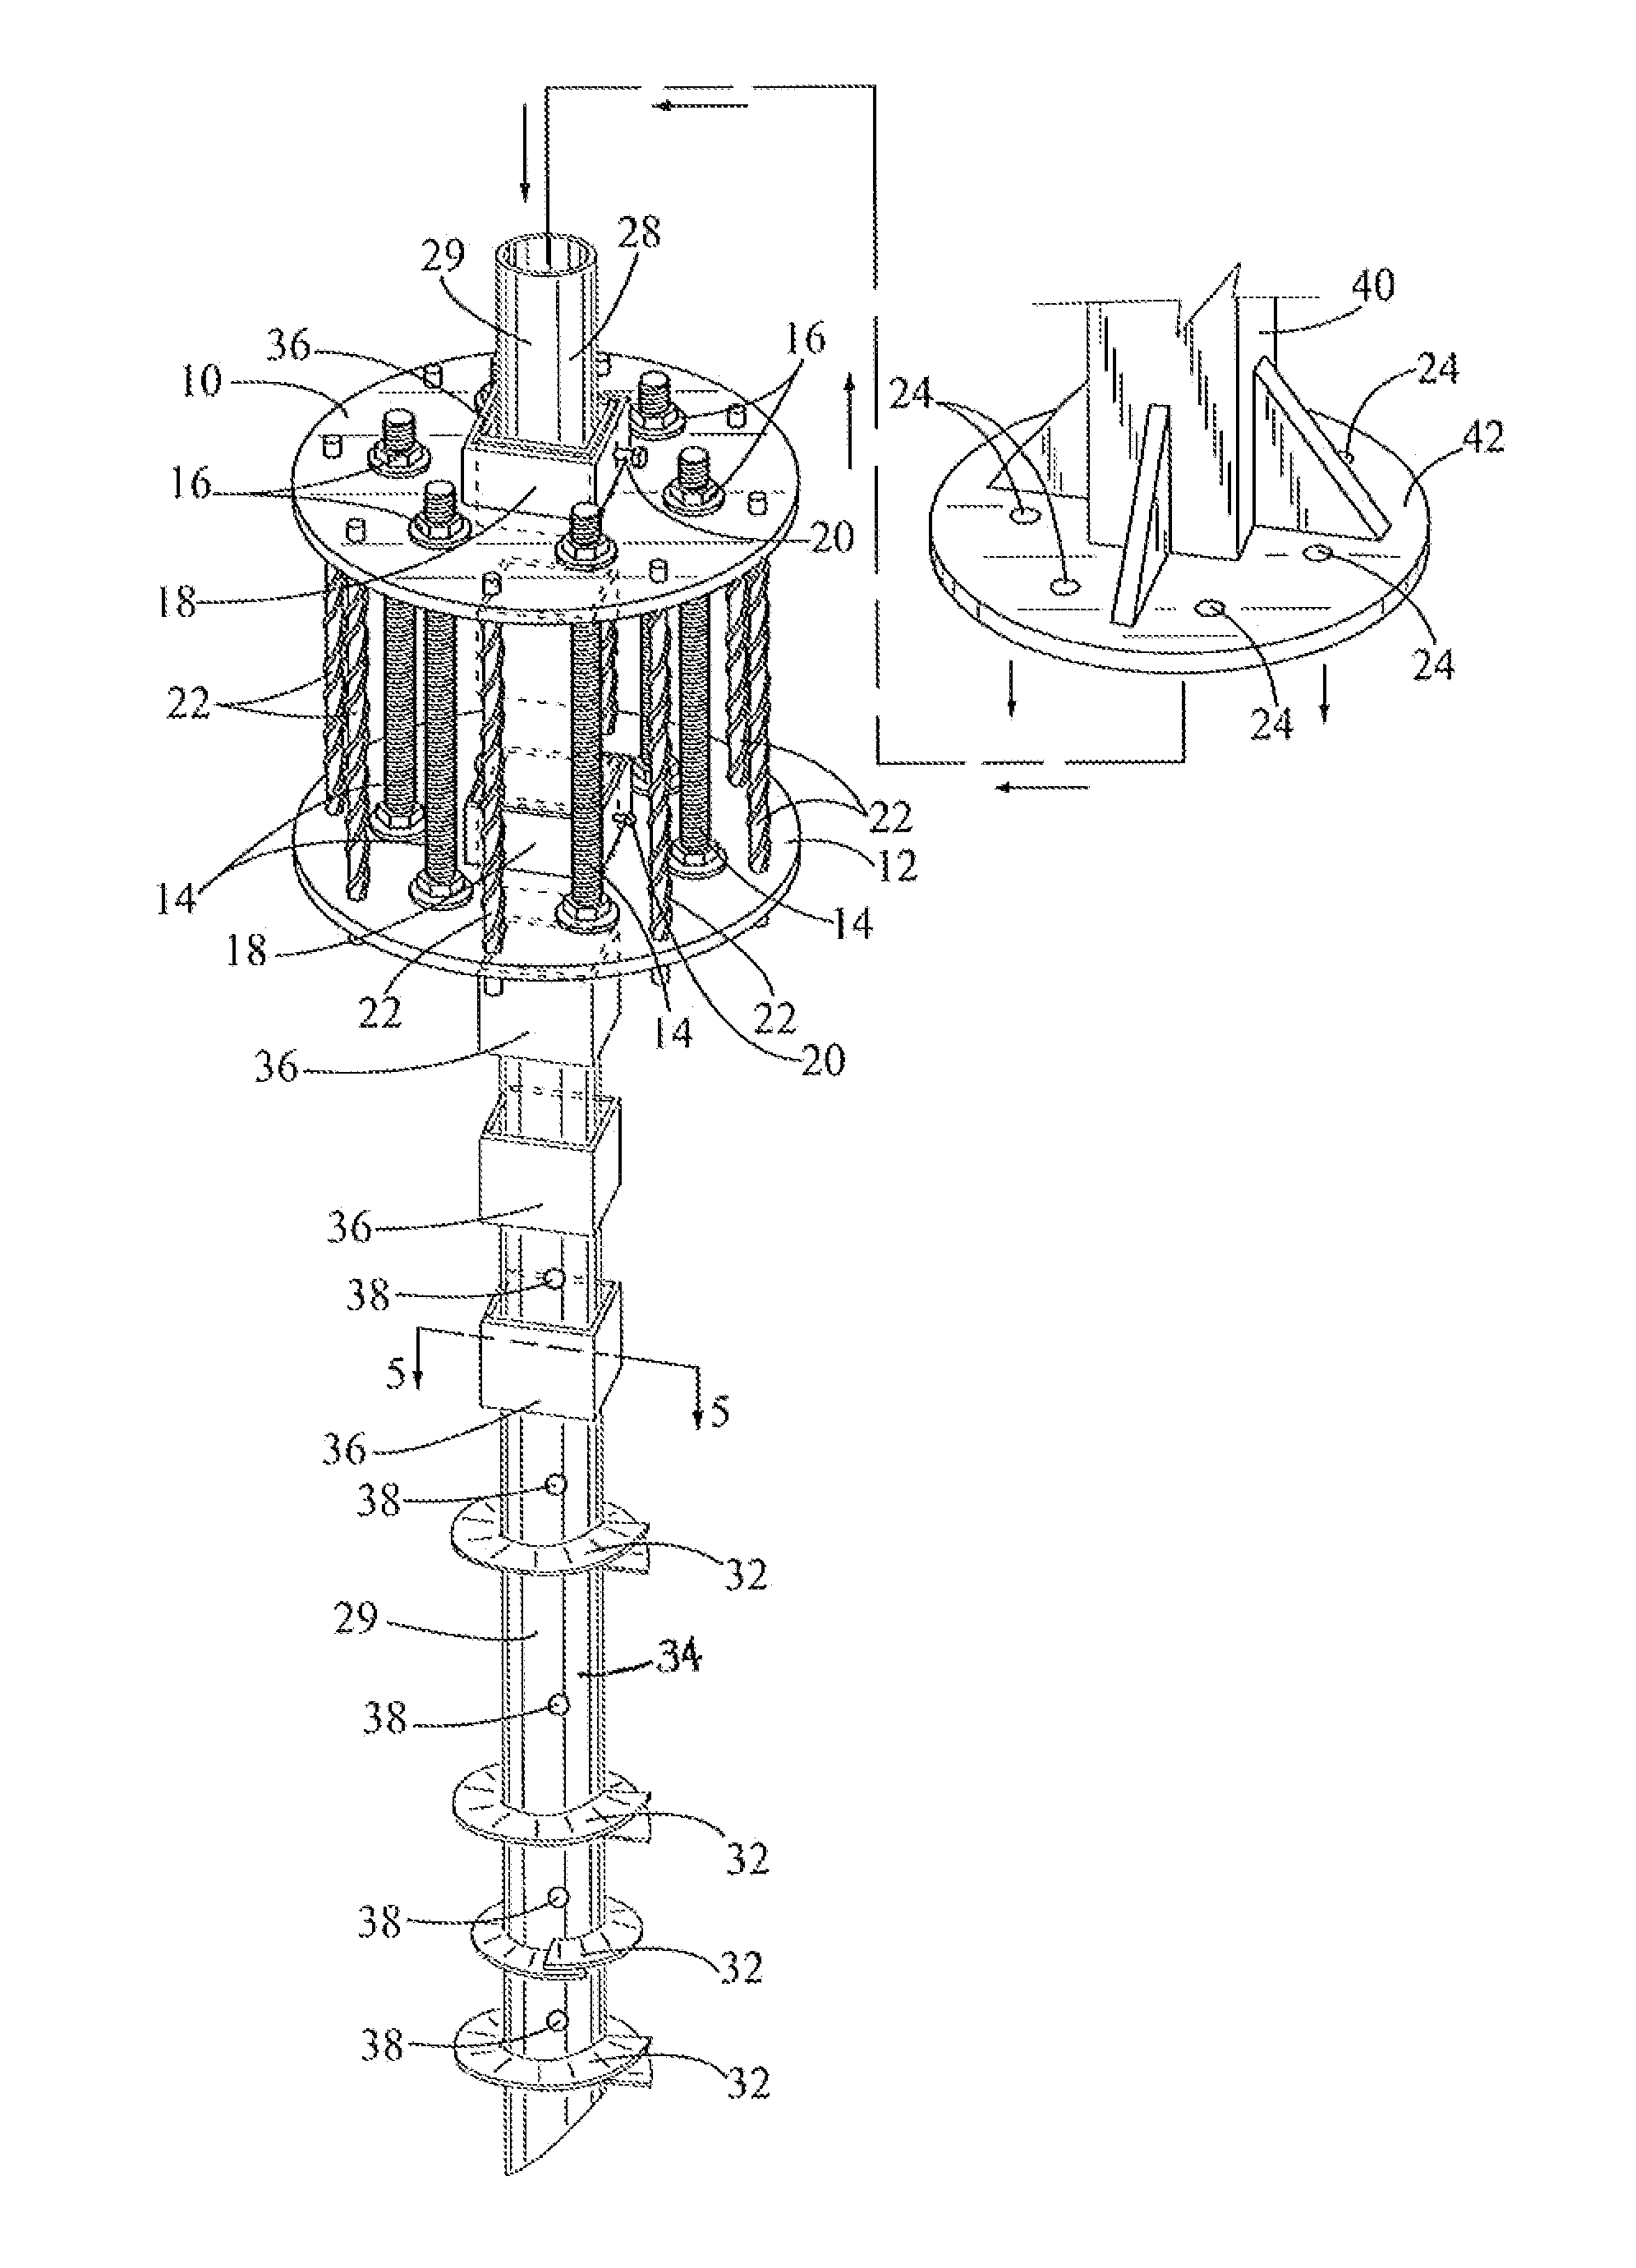 Helical pier with adjustable pierhead plates for supporting a structure above a ground surface